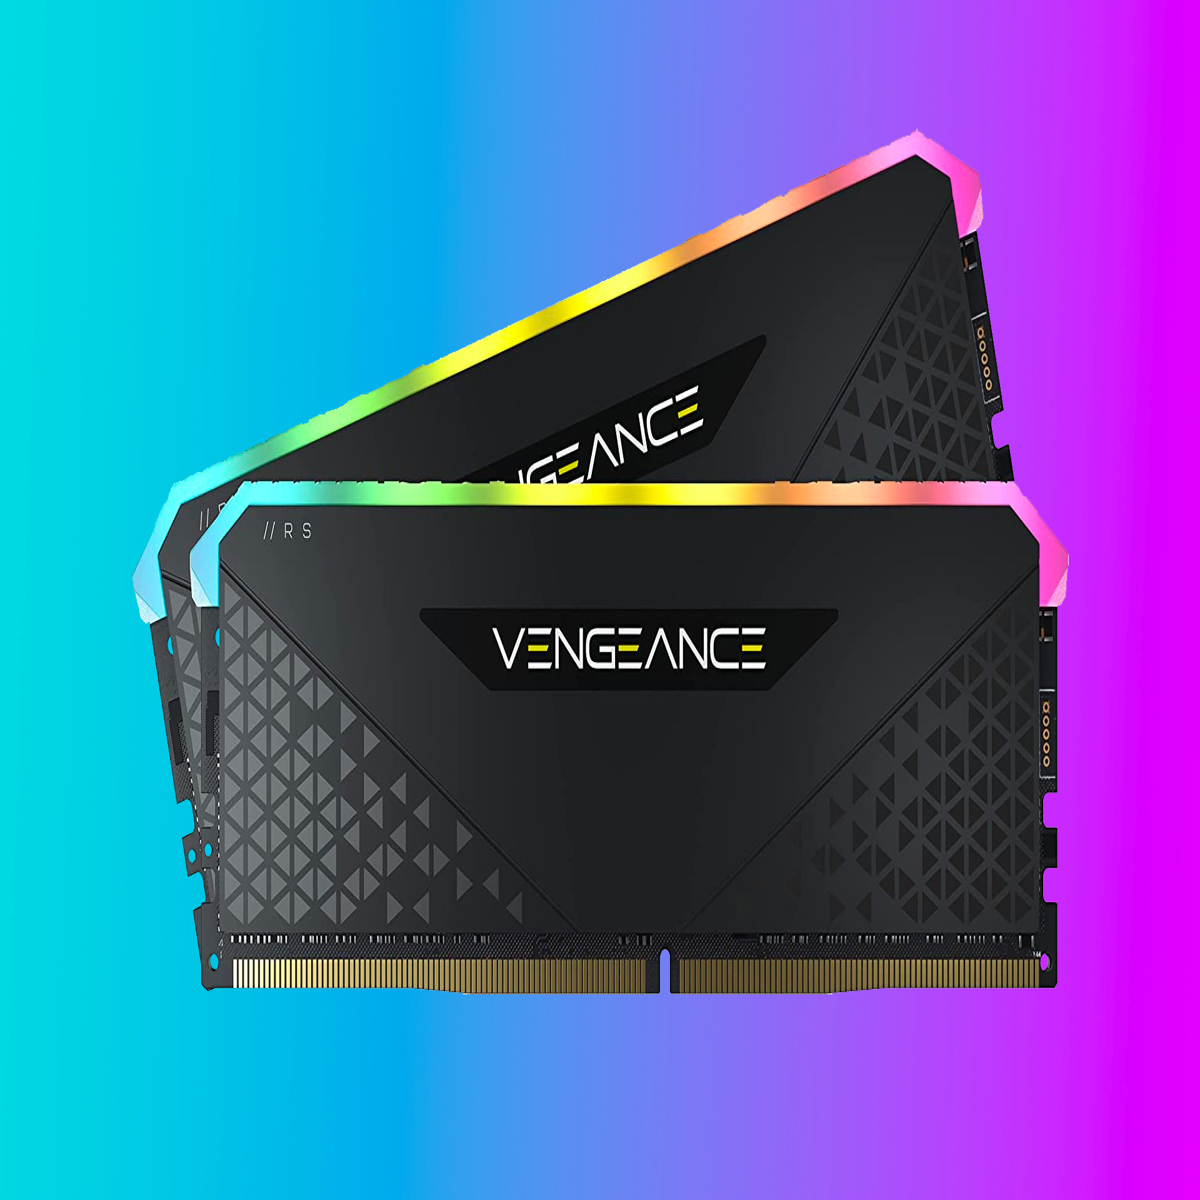 Grab 32GB of RAM for £79 Vengeance DDR4 from Amazon RGB RS Corsair solid